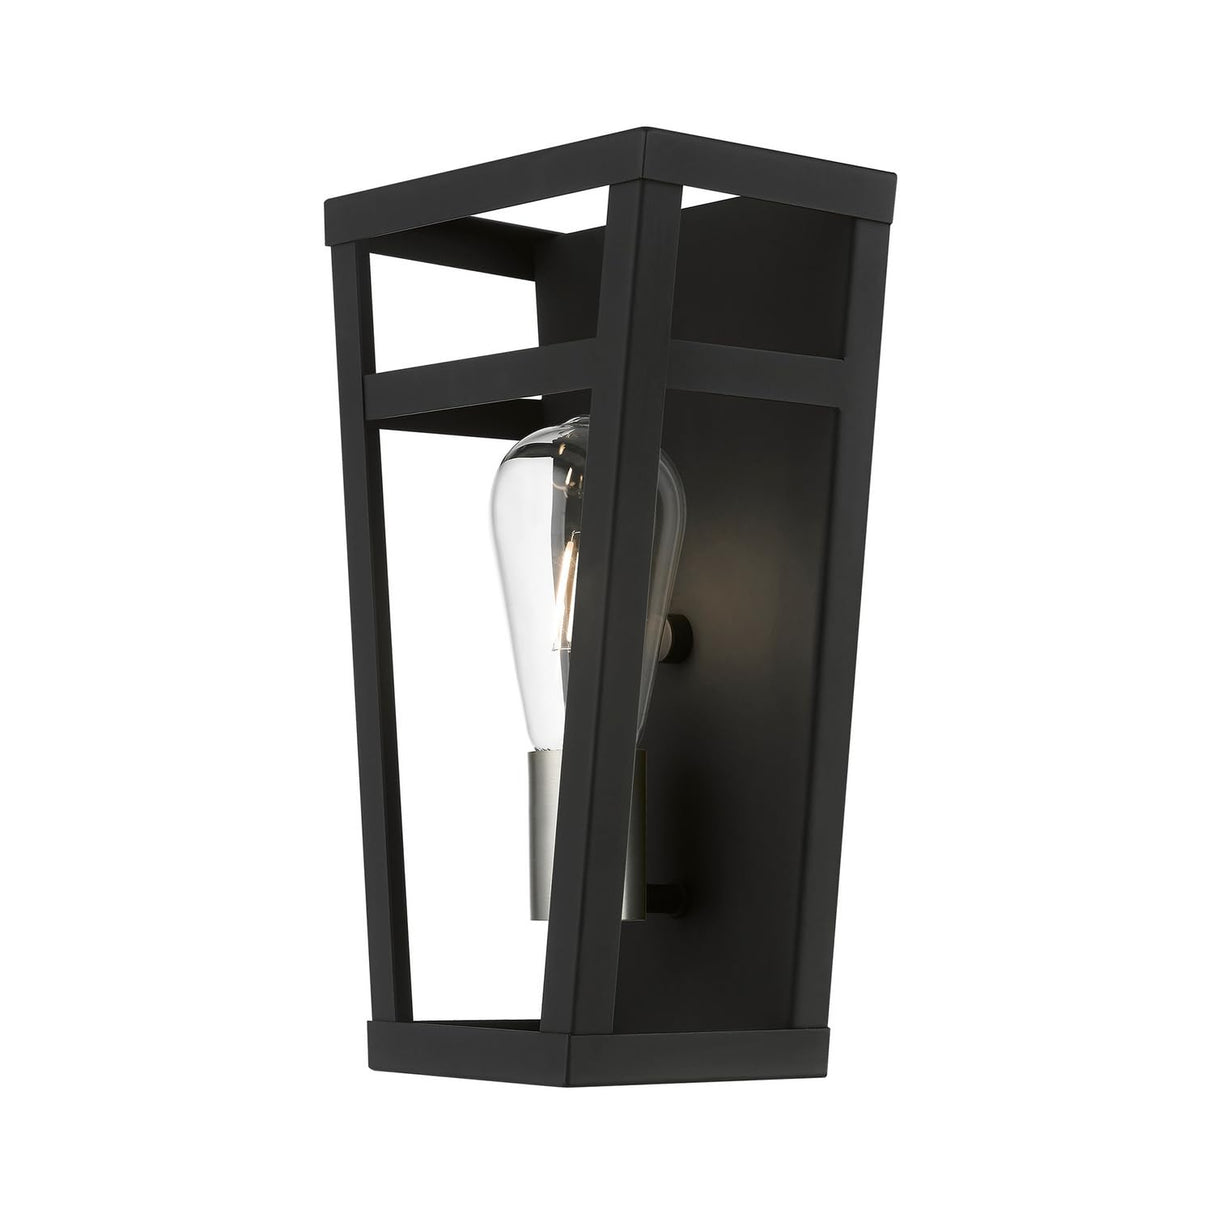 Schofield 1 Light Sconce in Black with Brushed Nickel (49567-04)